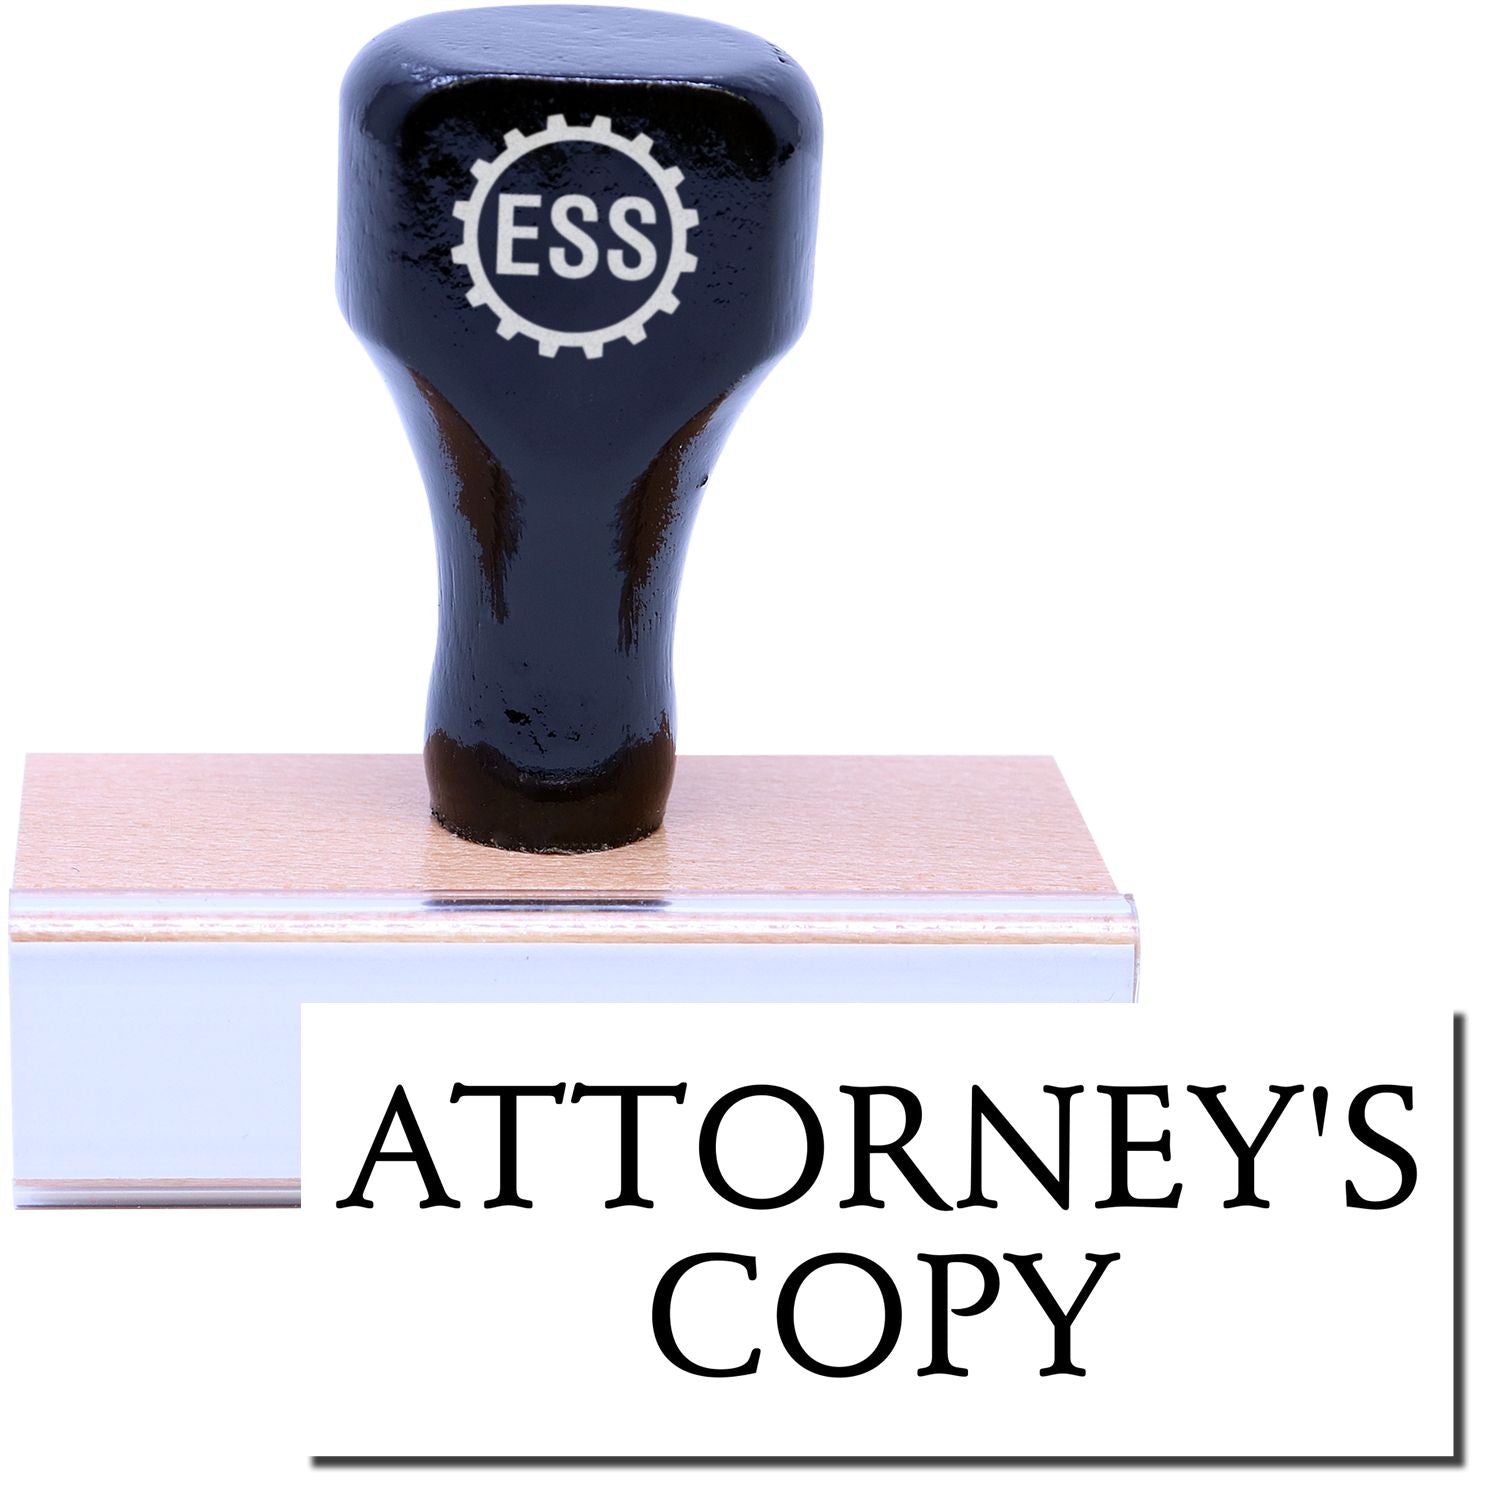 A stock office rubber stamp with a stamped image showing how the text "ATTORNEY'S COPY" is displayed after stamping.